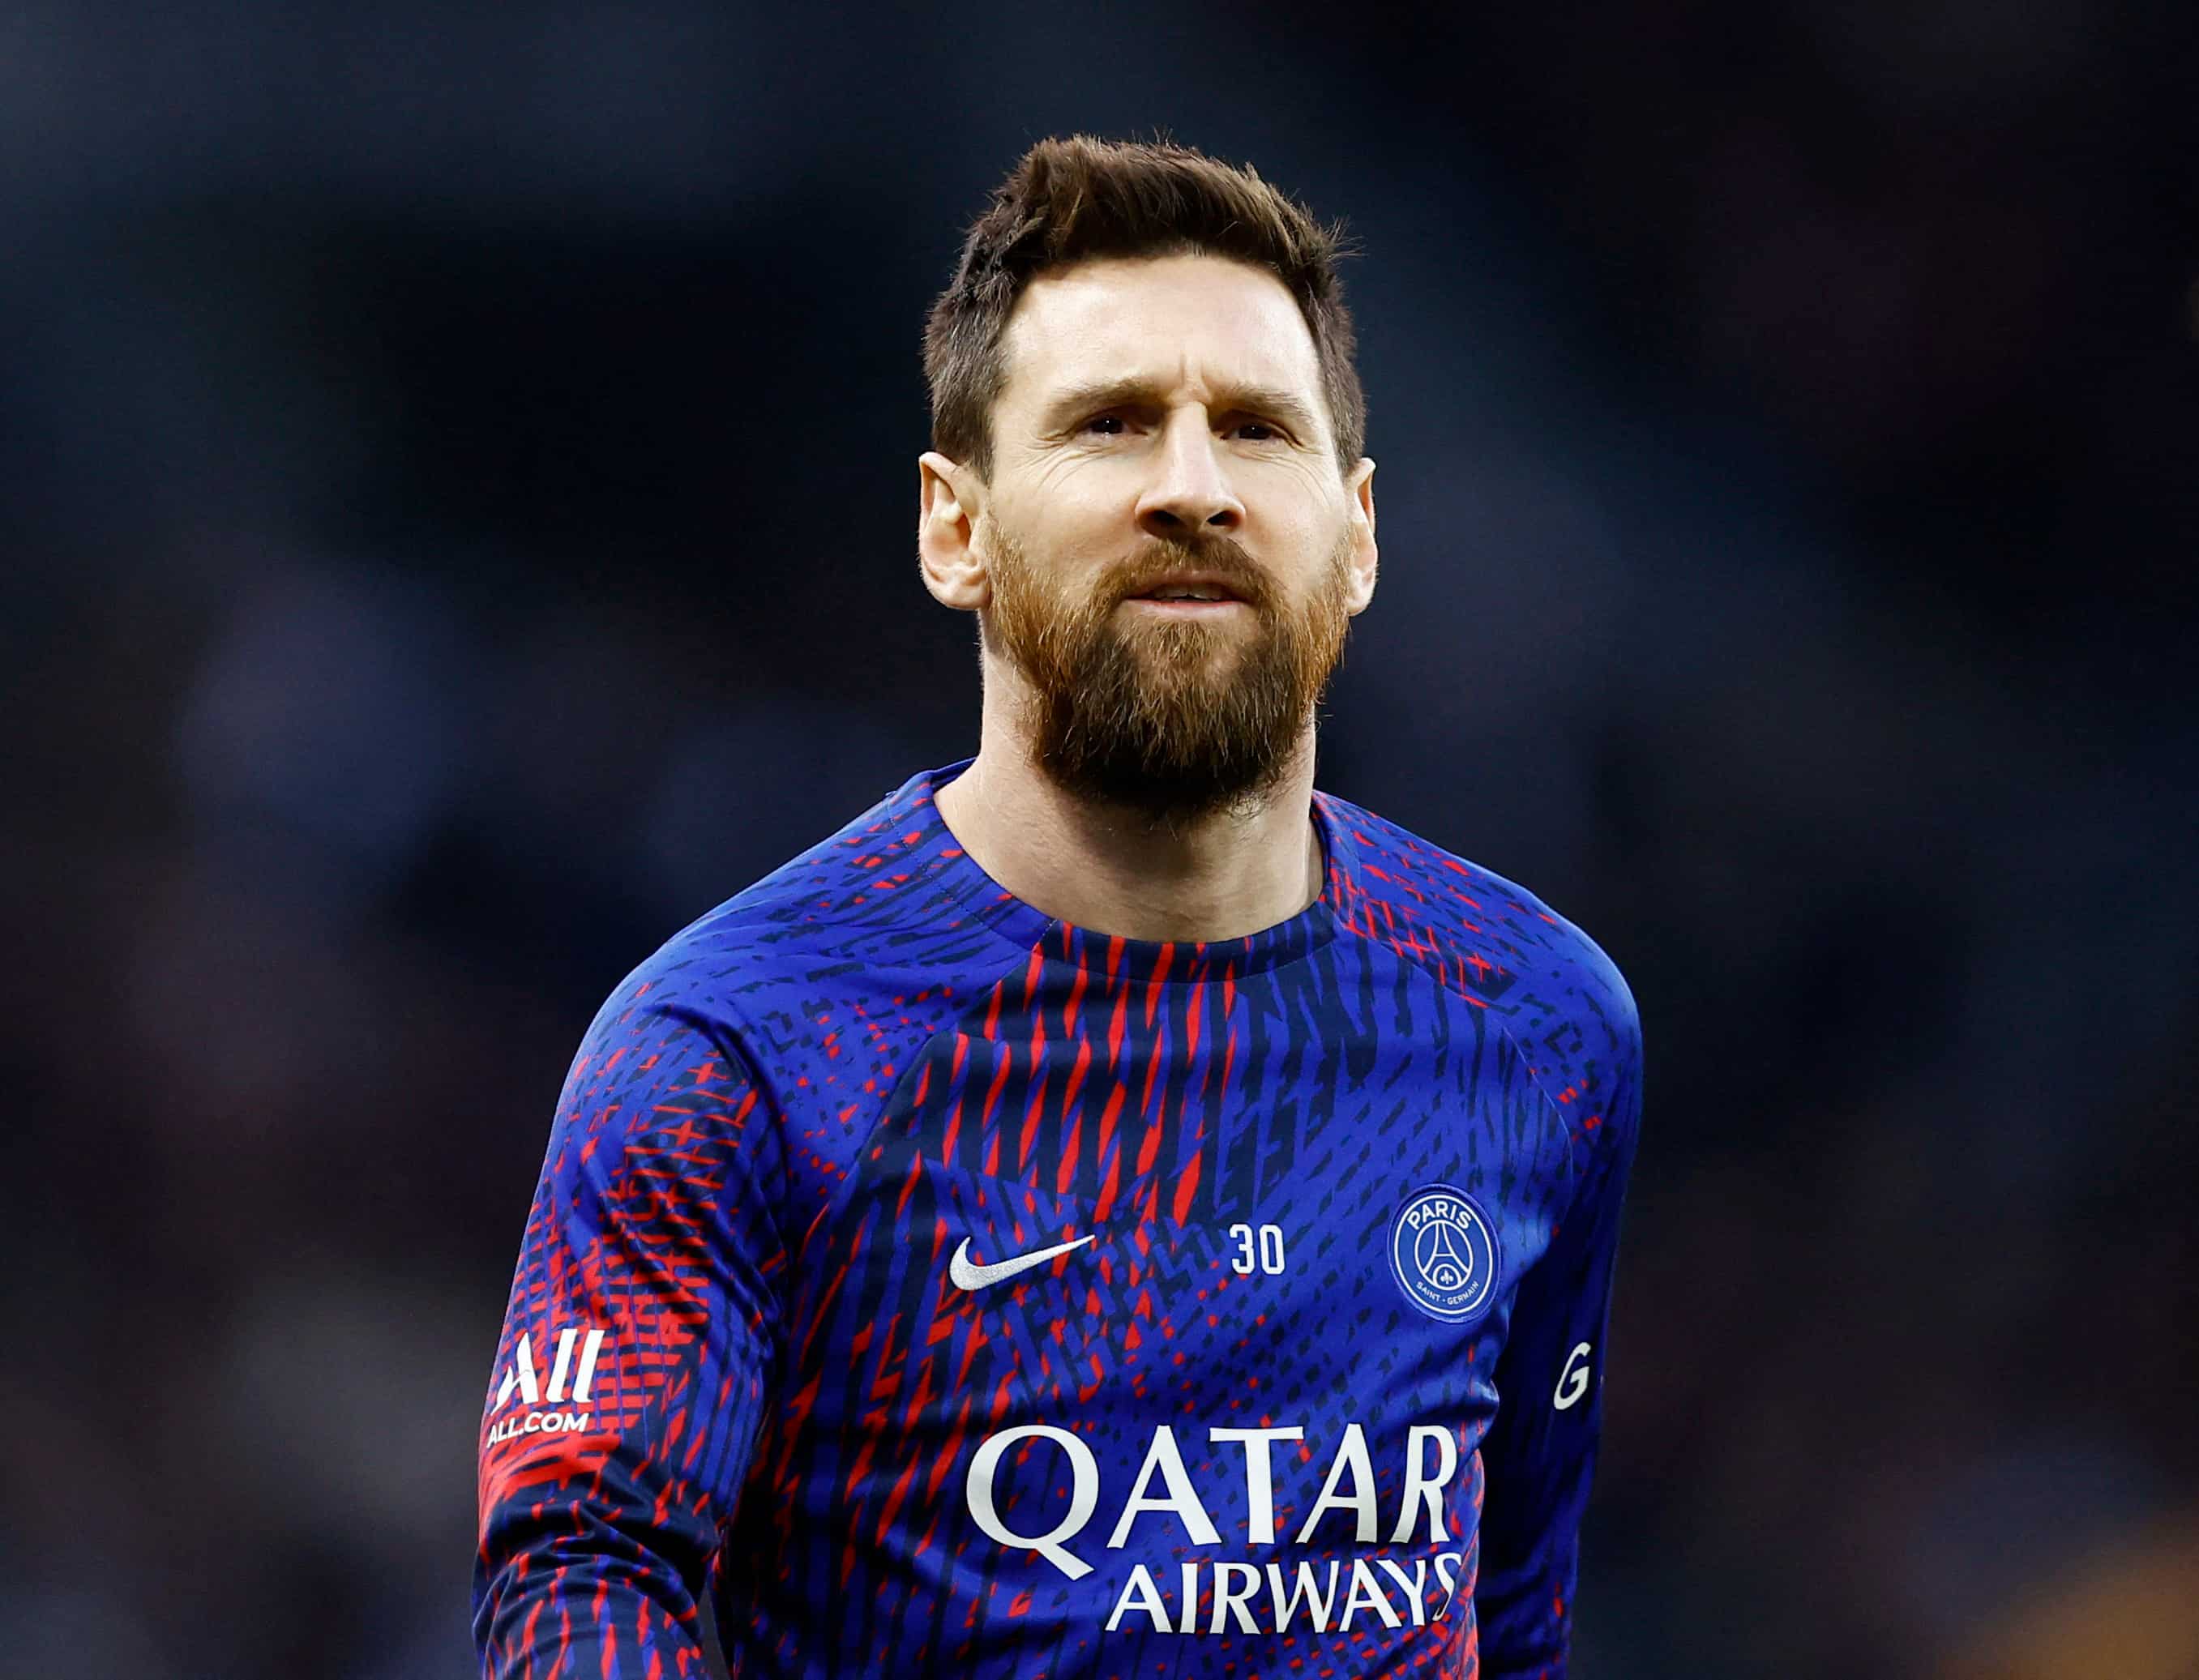 Messi transfer news Will Lionel Messi leave PSG for Al-Hilal, Barcelona or a Premier League club? Zee Business